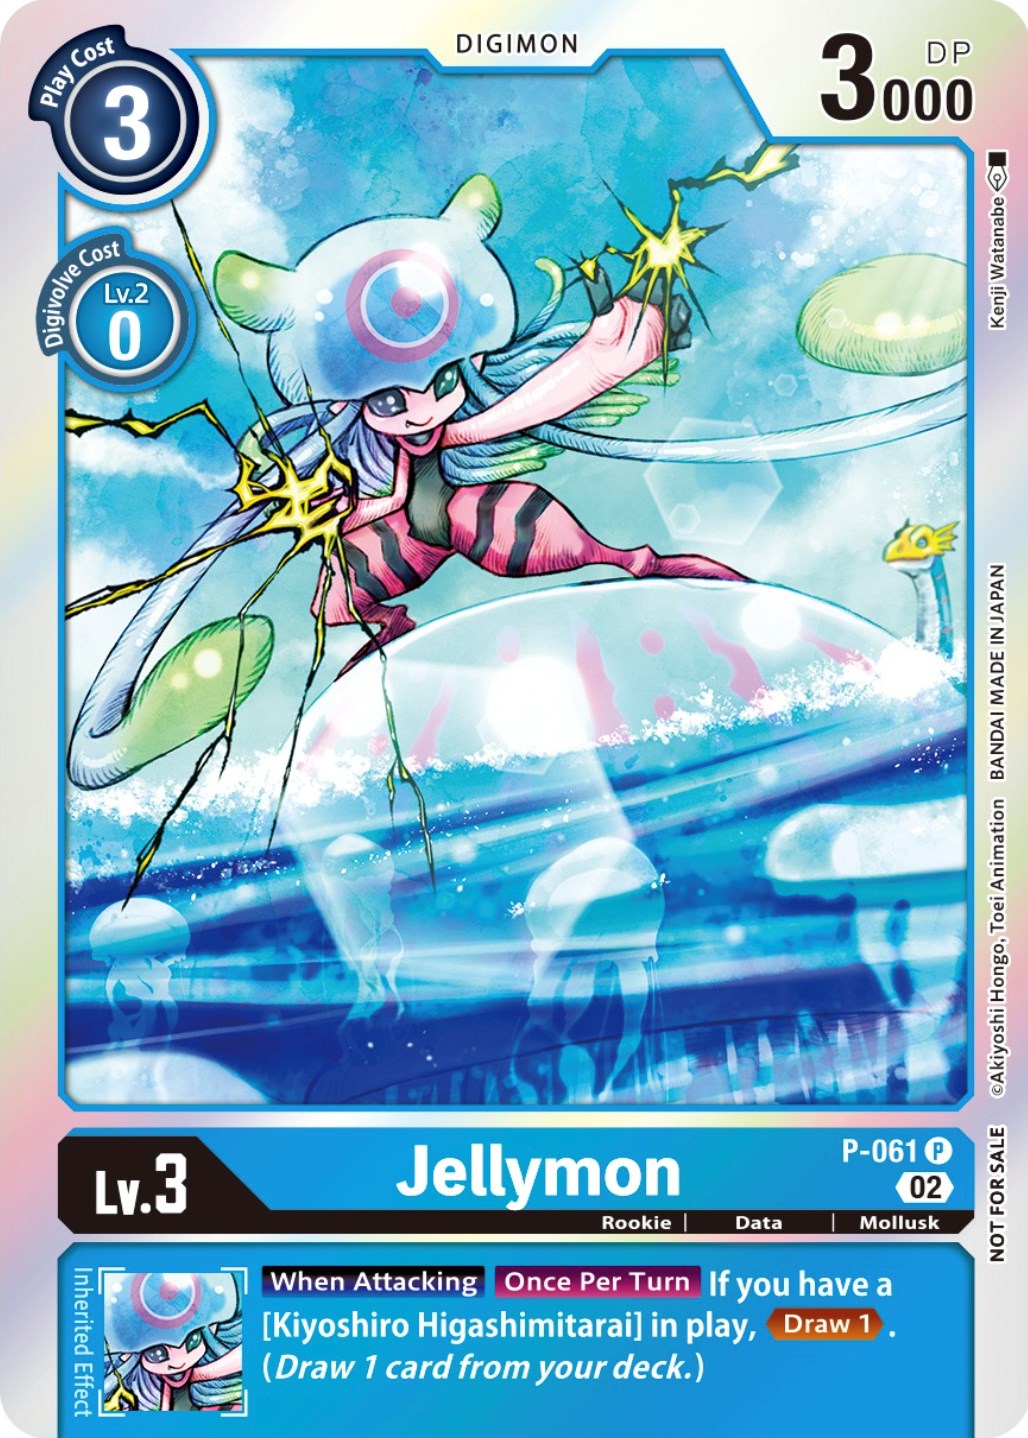 Jellymon [P-061] (Winner Pack Royal Knights) [Promotional Cards]